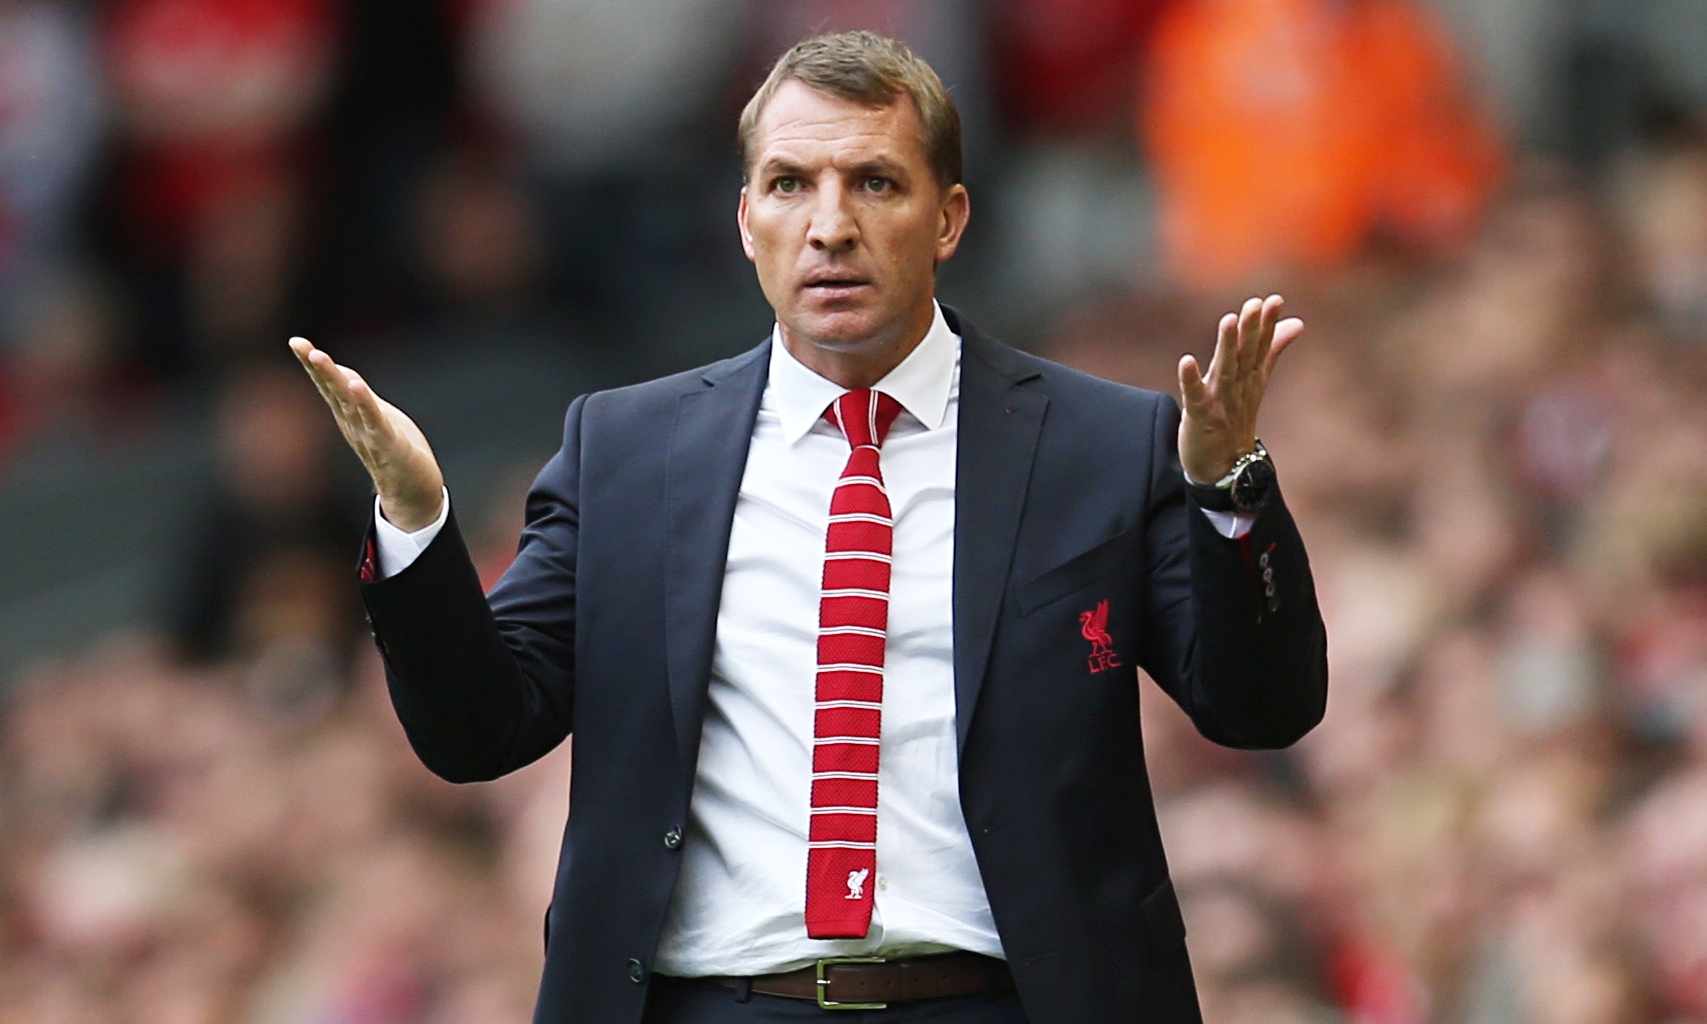 http://static.guim.co.uk/sys-images/Football/Pix/pictures/2014/9/28/1411911248697/Brendan-Rodgers-011.jpg